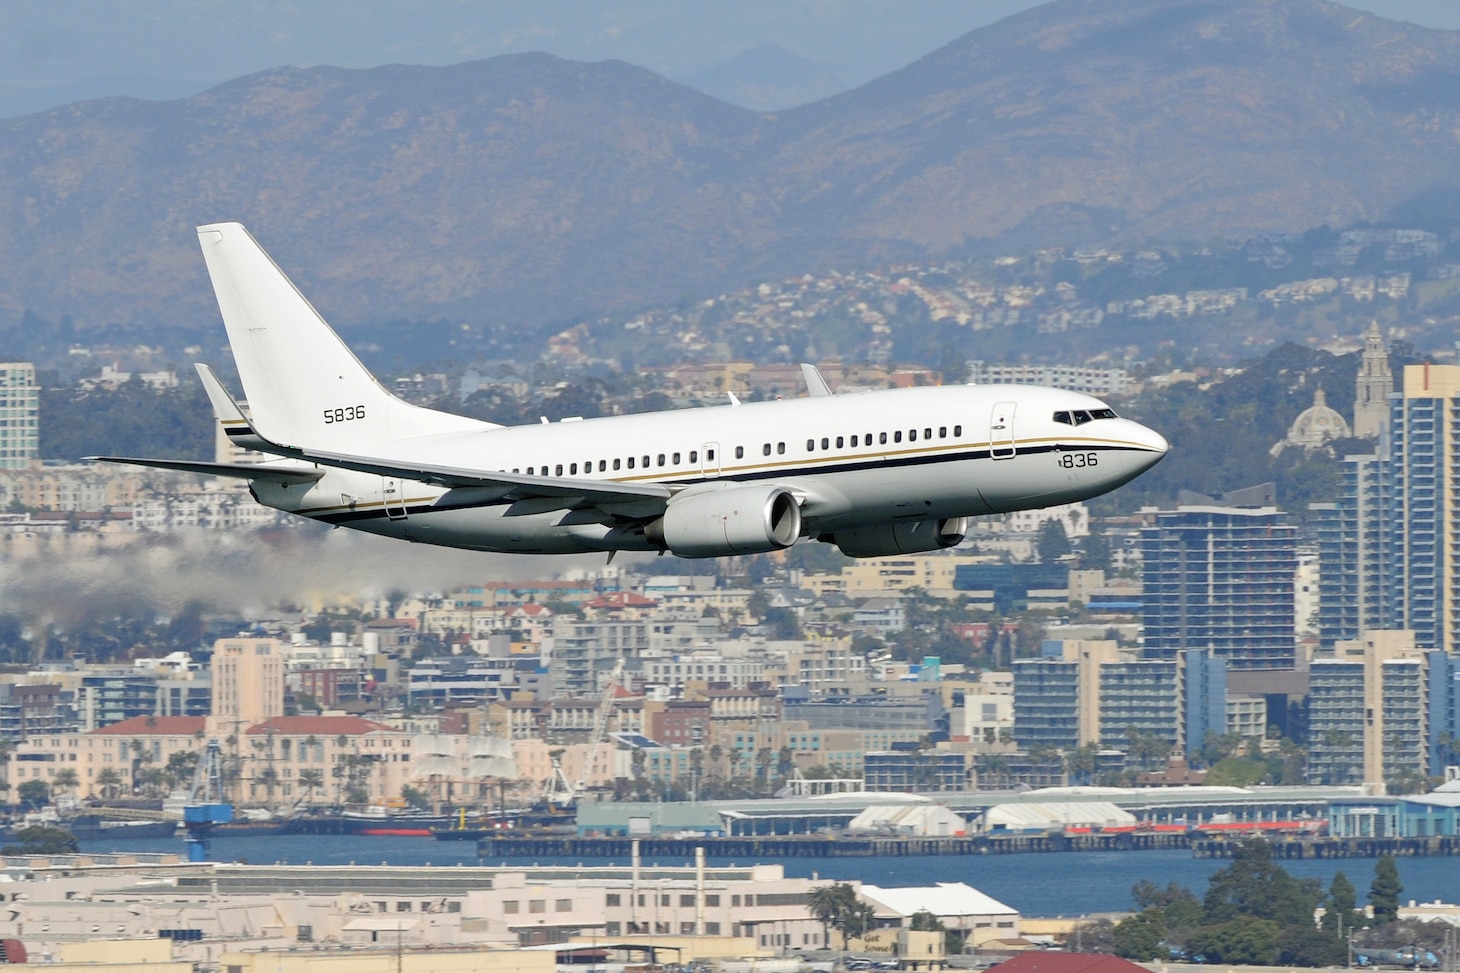 A C-40A Clipper assigned to Fleet Logistics Support Squadron (VR) 57 flies over San Diego, California.